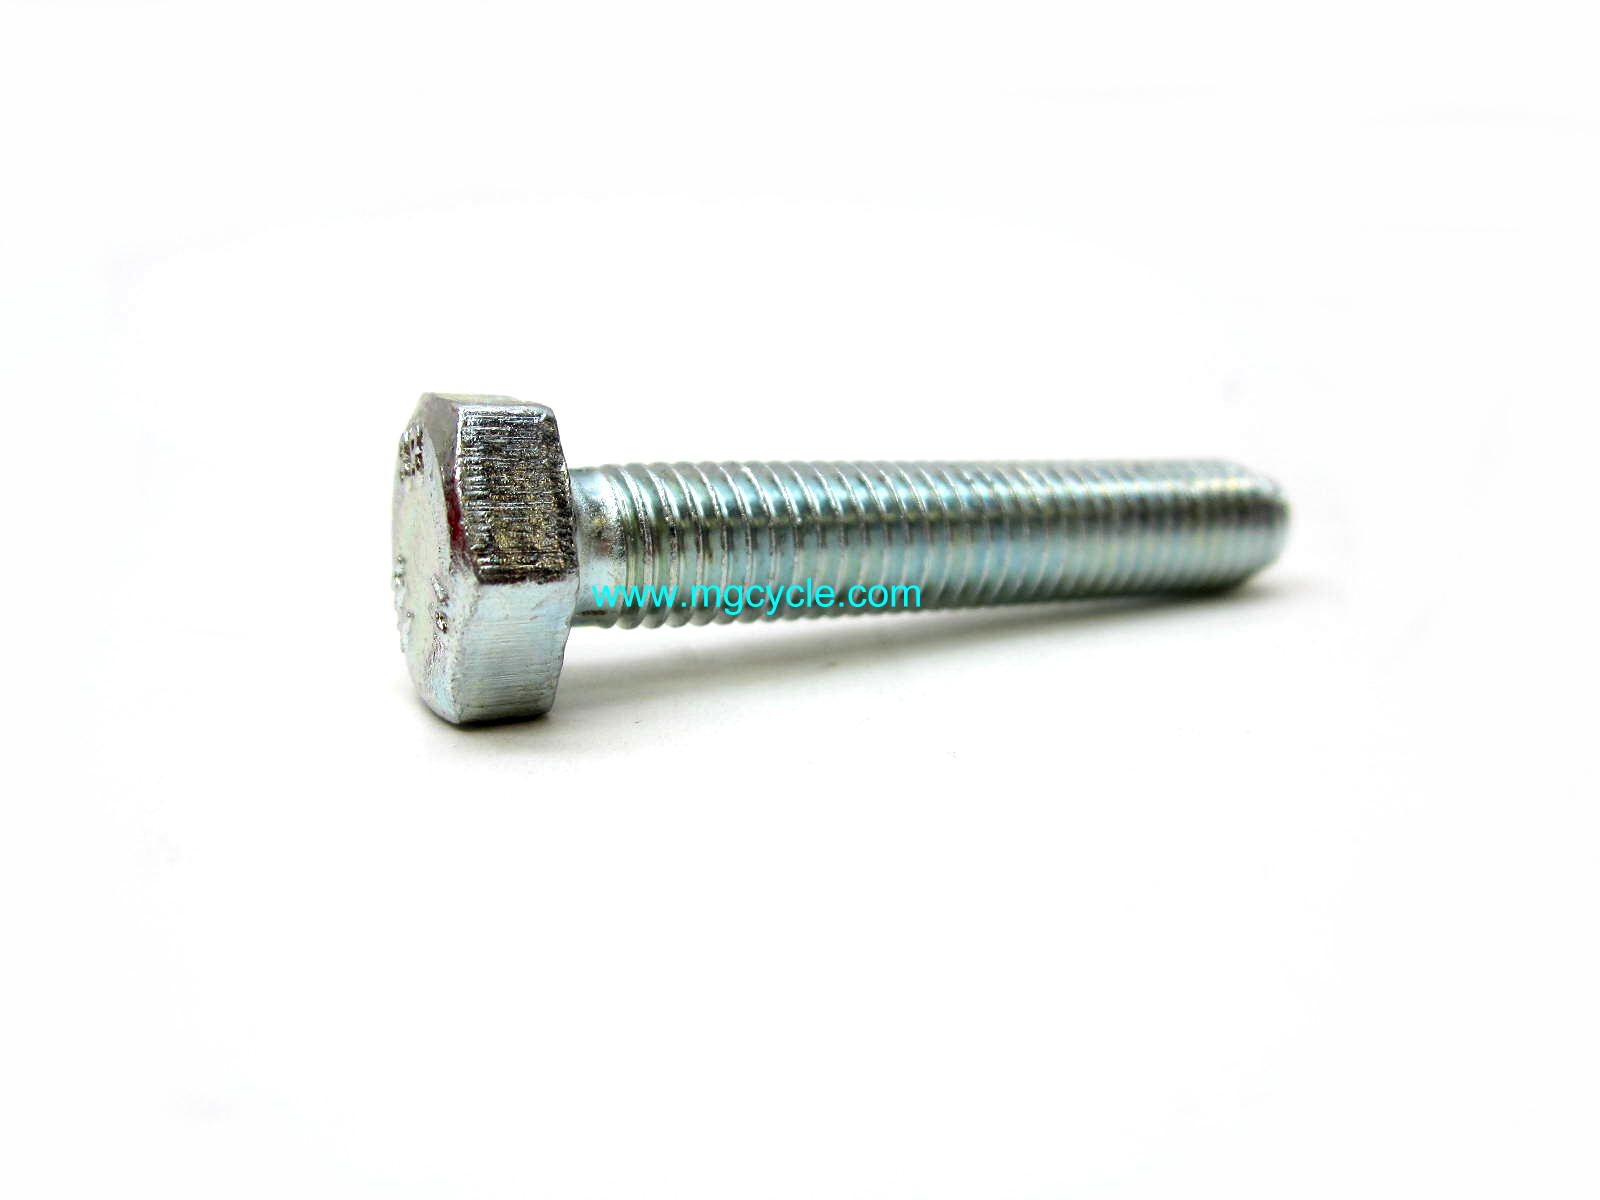 center stand pivot bolt, 55mm, used with mid-mount side stand